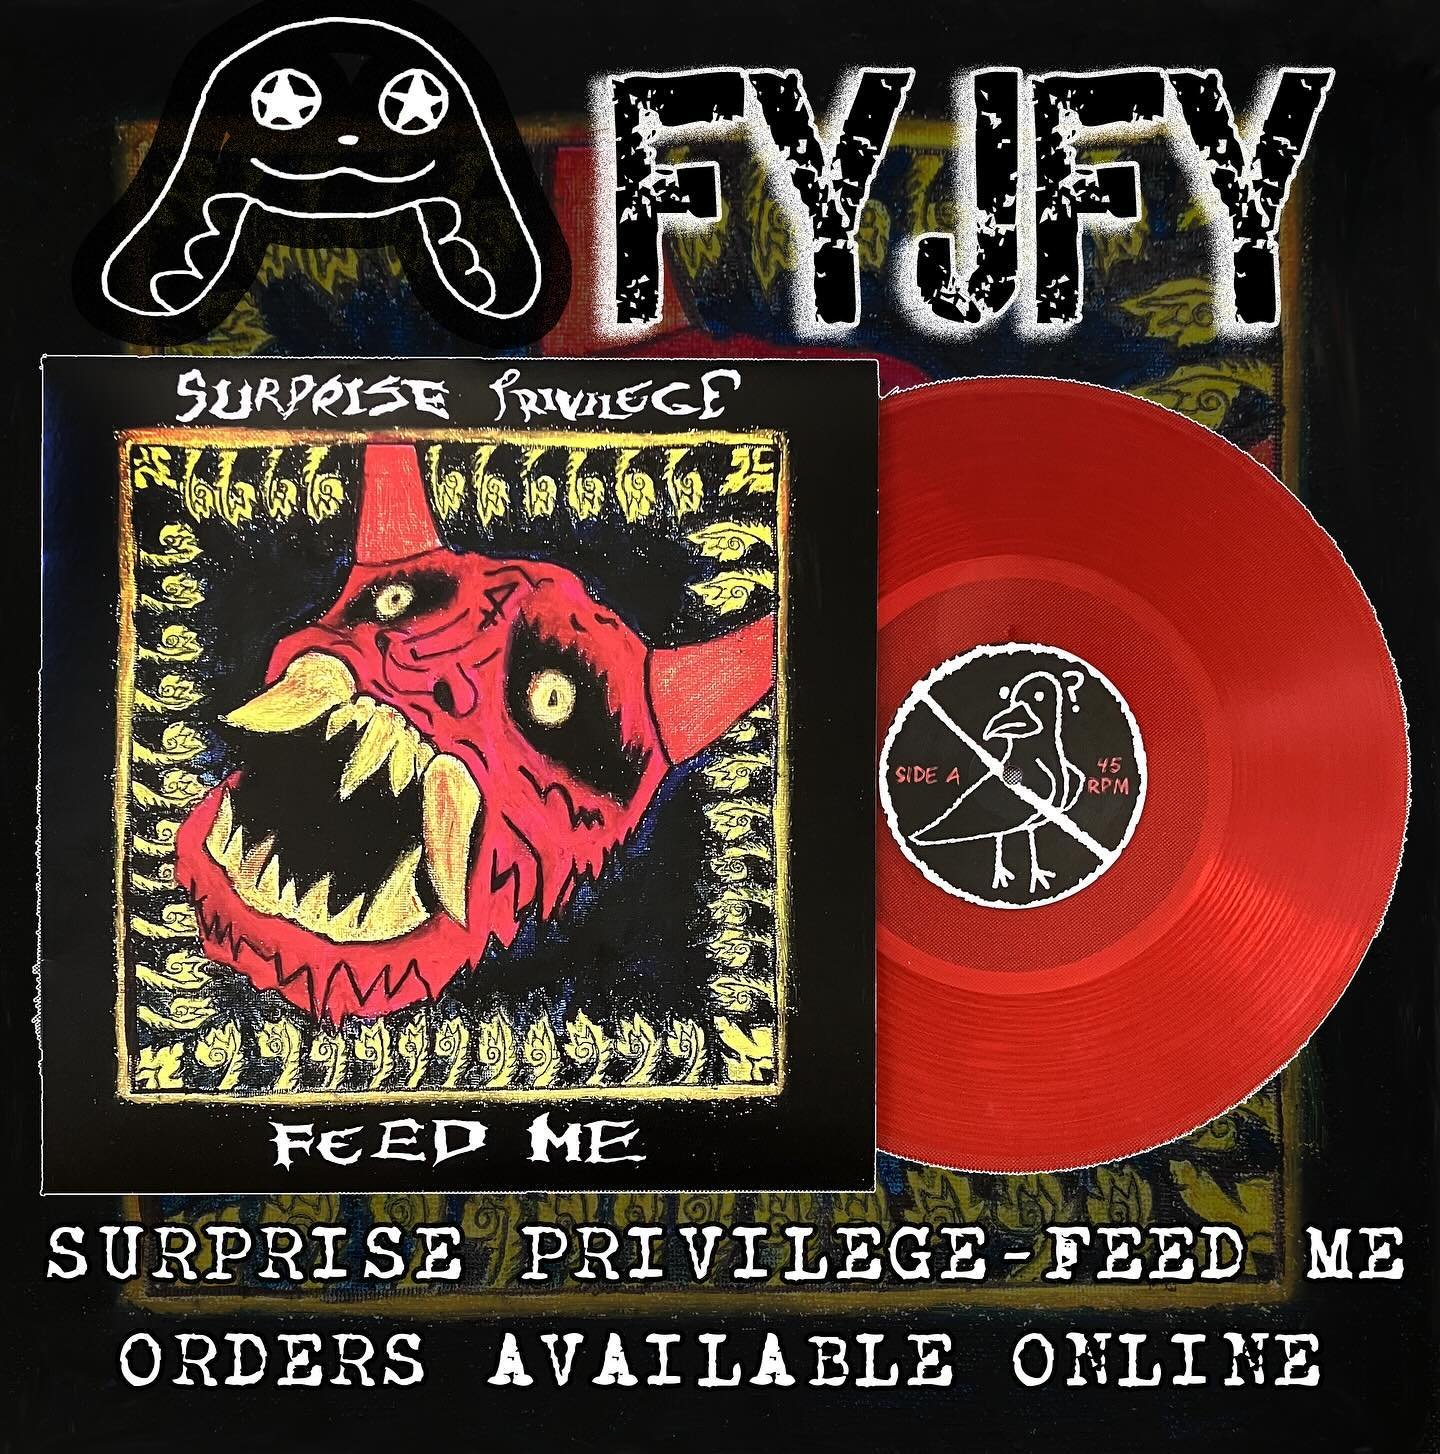 FYJFY VINYLS ARE NOW AVAILABLE FOR ORDER ONLINE (LINK IN BIO). pick up a @surpriseprivilege record if you can&rsquo;t make it to one of their shows, they&rsquo;re also available for purchase at @thrillhouse_records and @amoebasf as well as @amoebaber